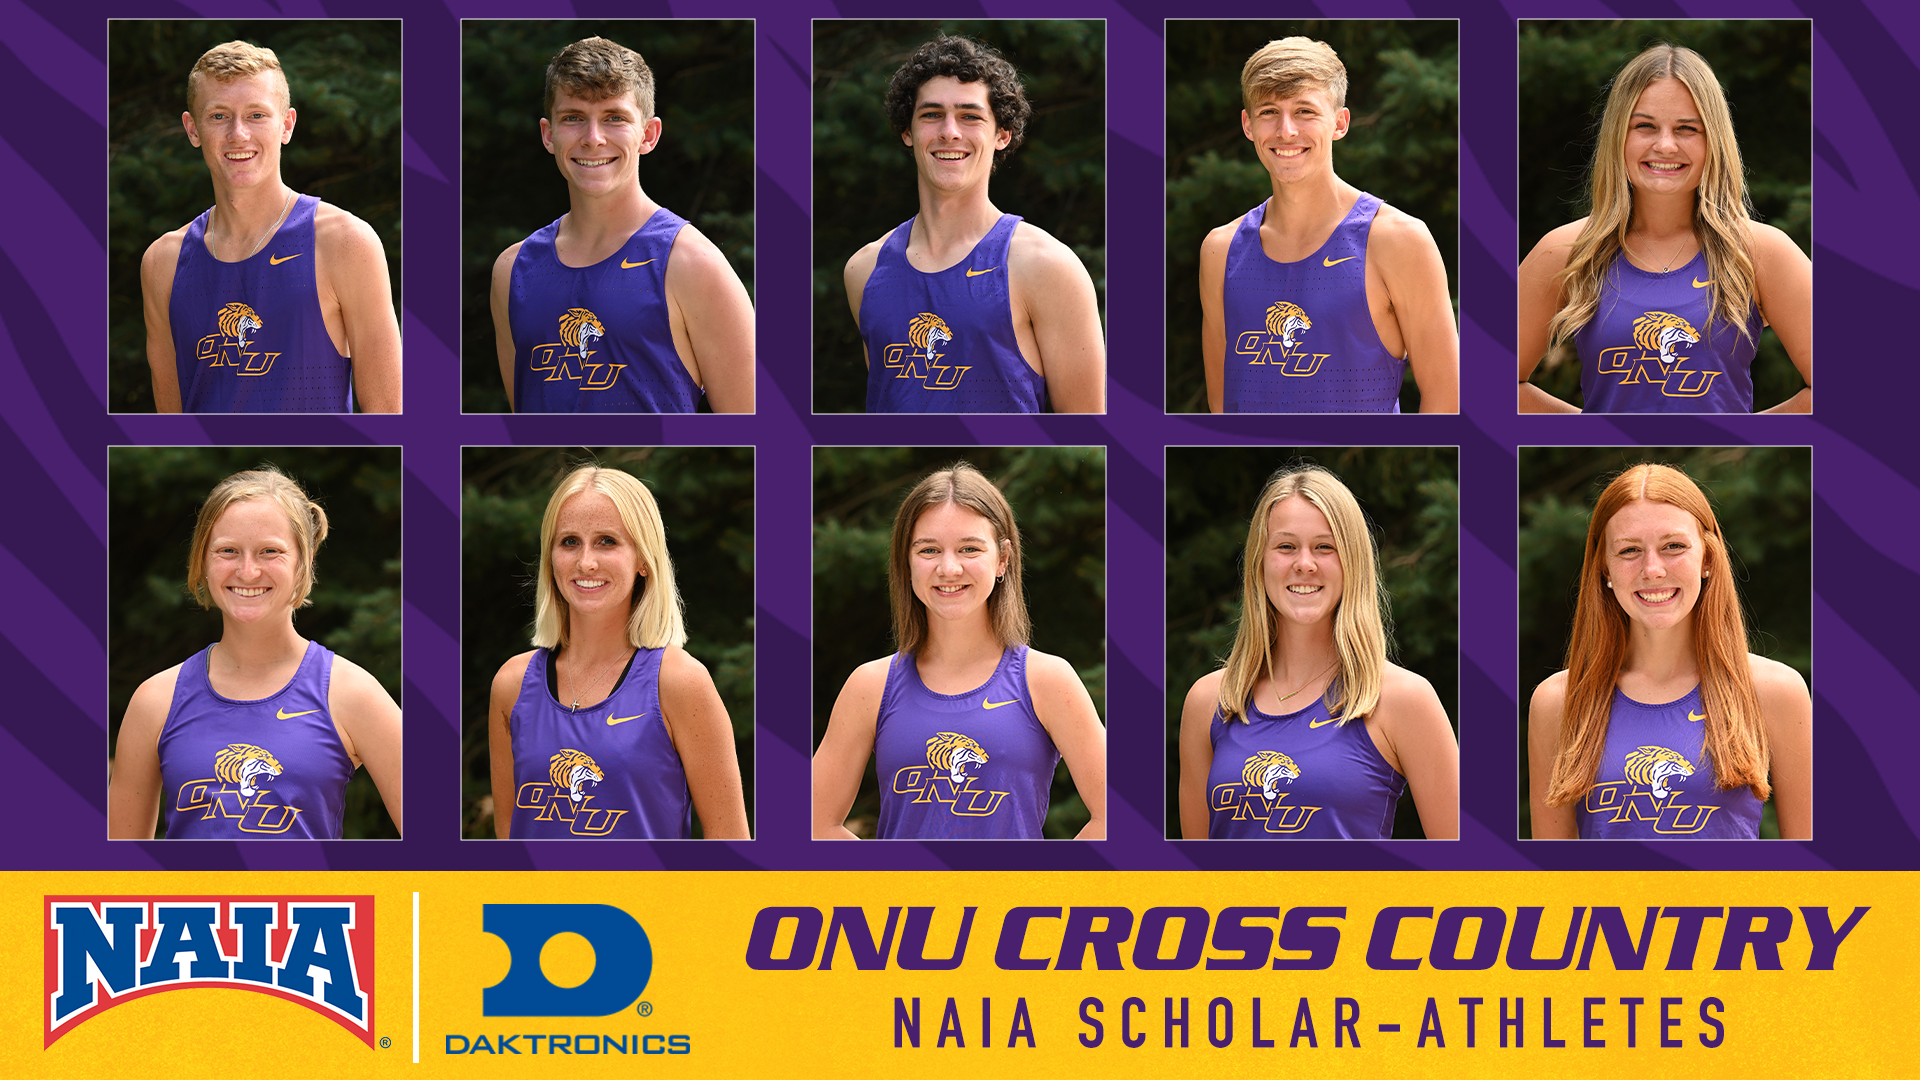 ONU CROSS COUNTRY EARNS 10 NAMES ON NAIA SCHOLAR-ATHLETE HONOR ROLL